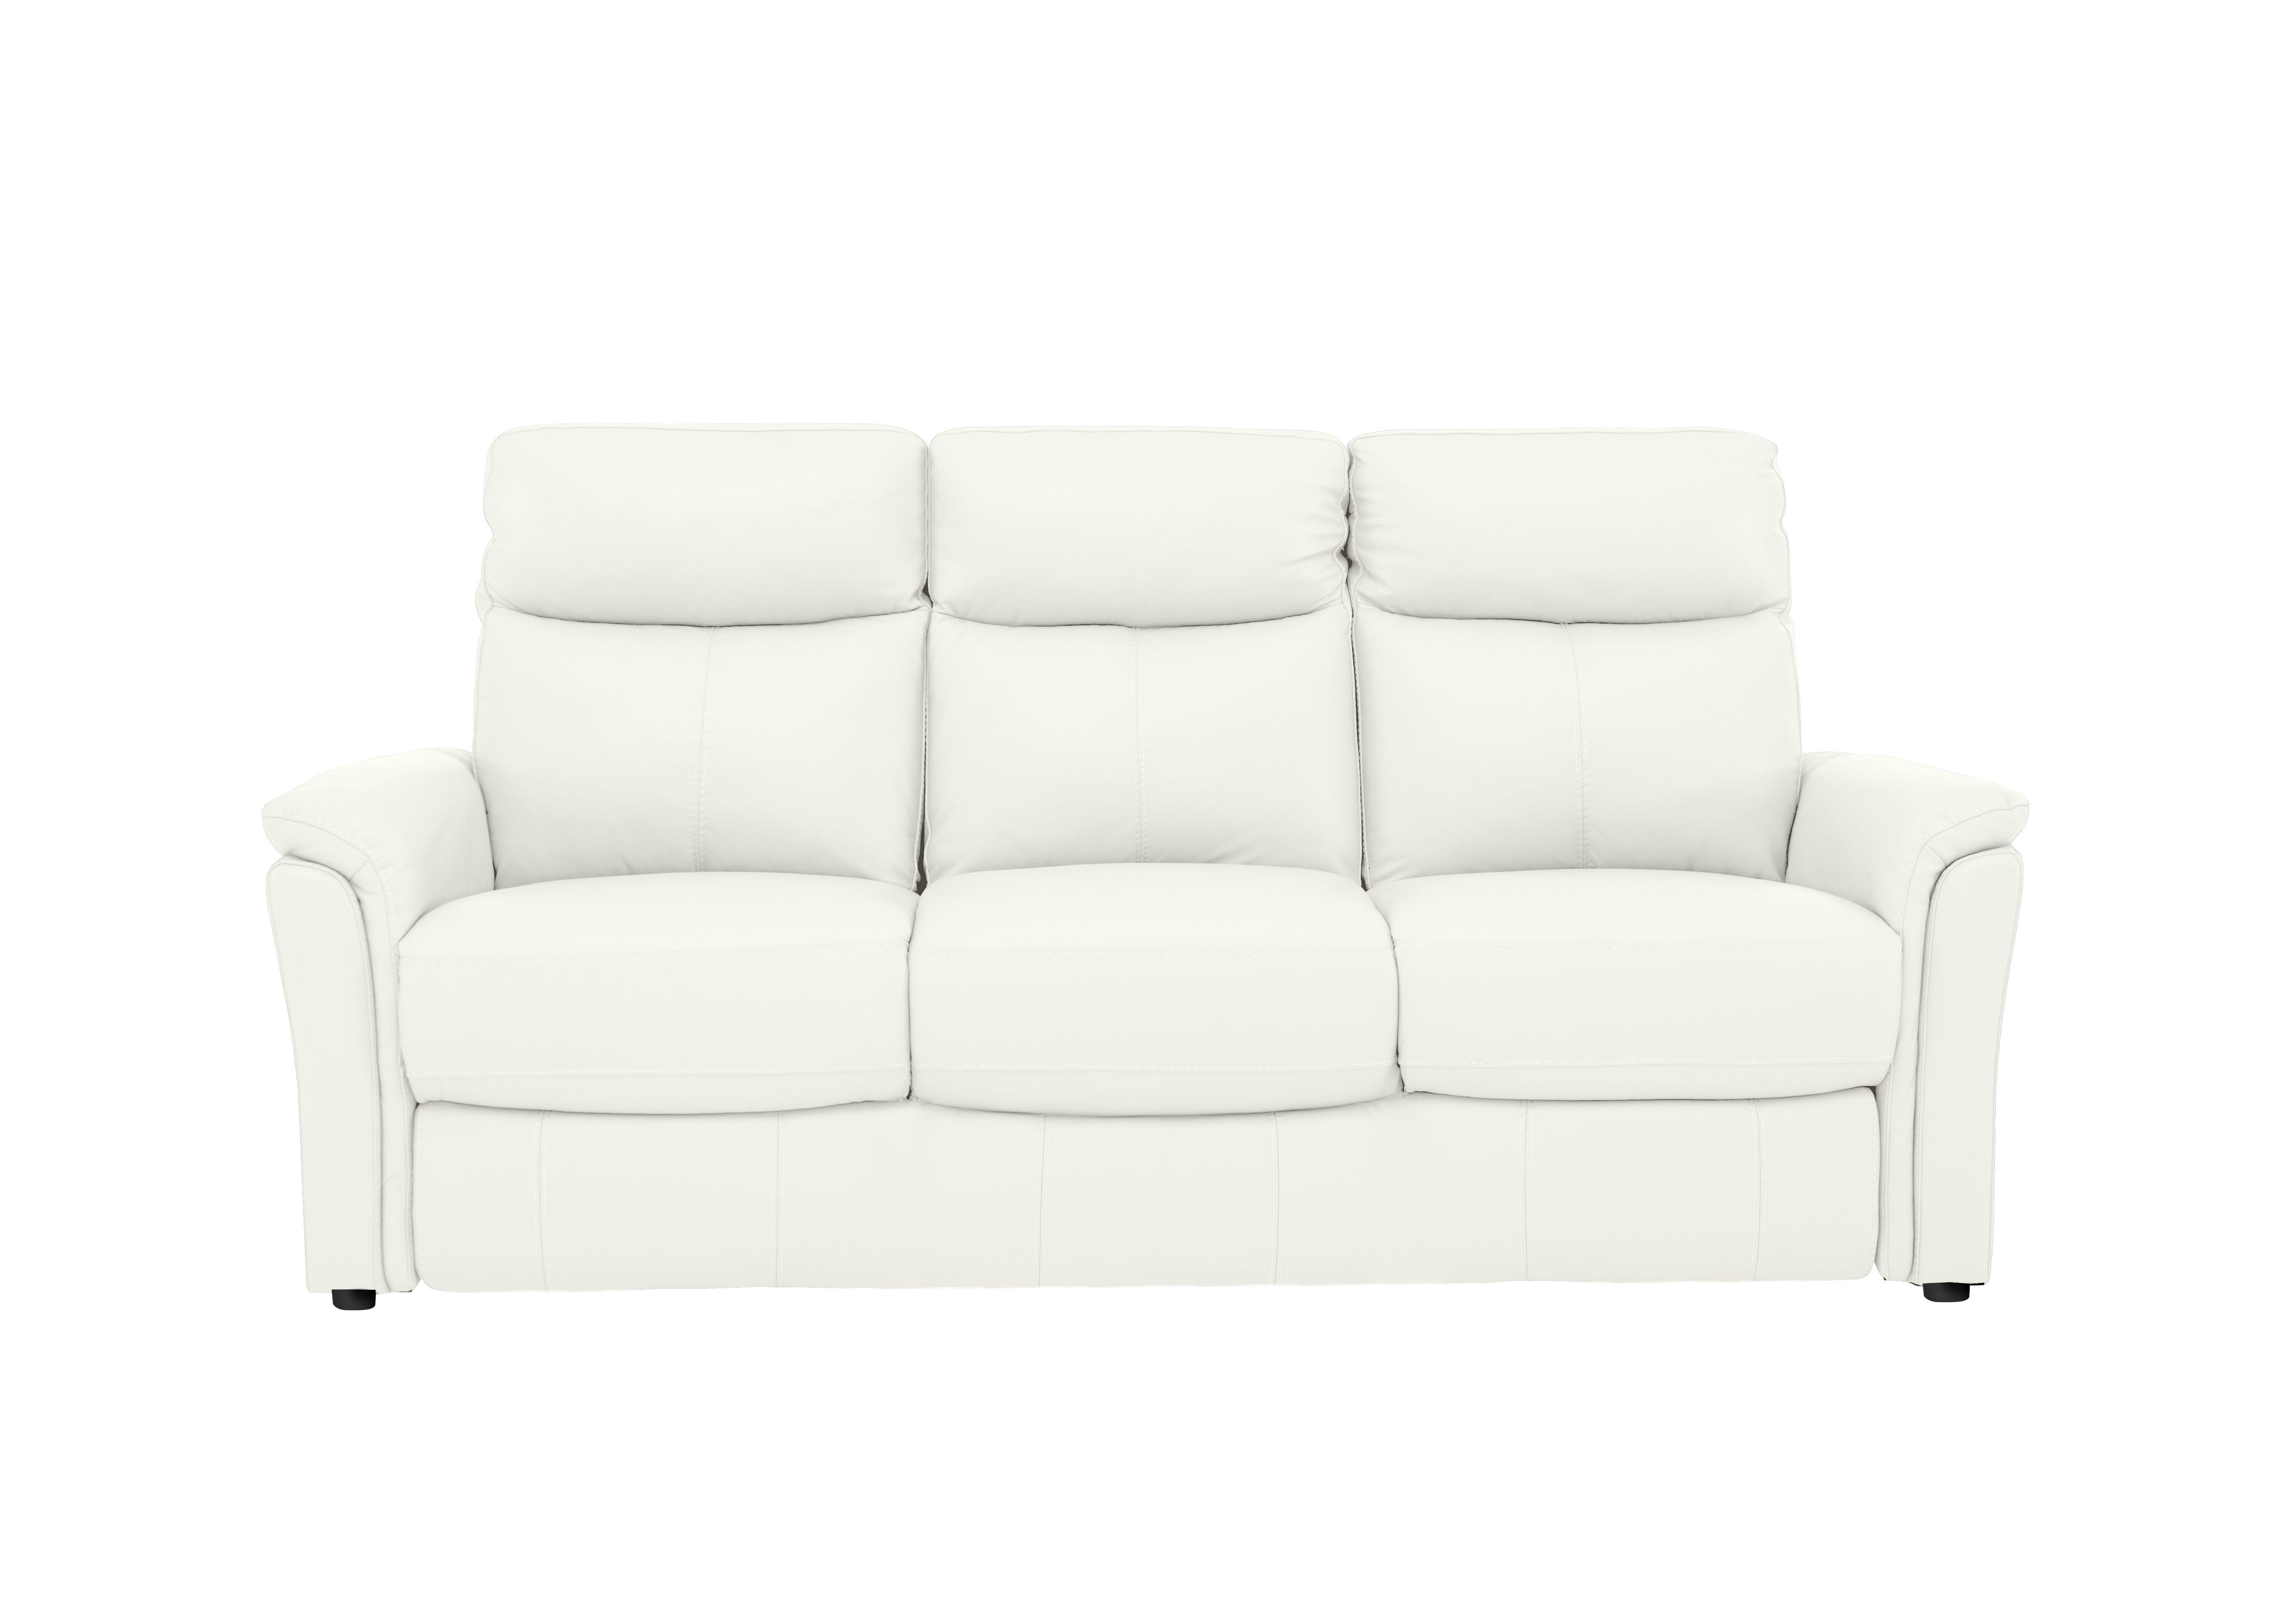 Compact Collection Piccolo 3 Seater Leather Static Sofa in Bv-744d Star White on Furniture Village